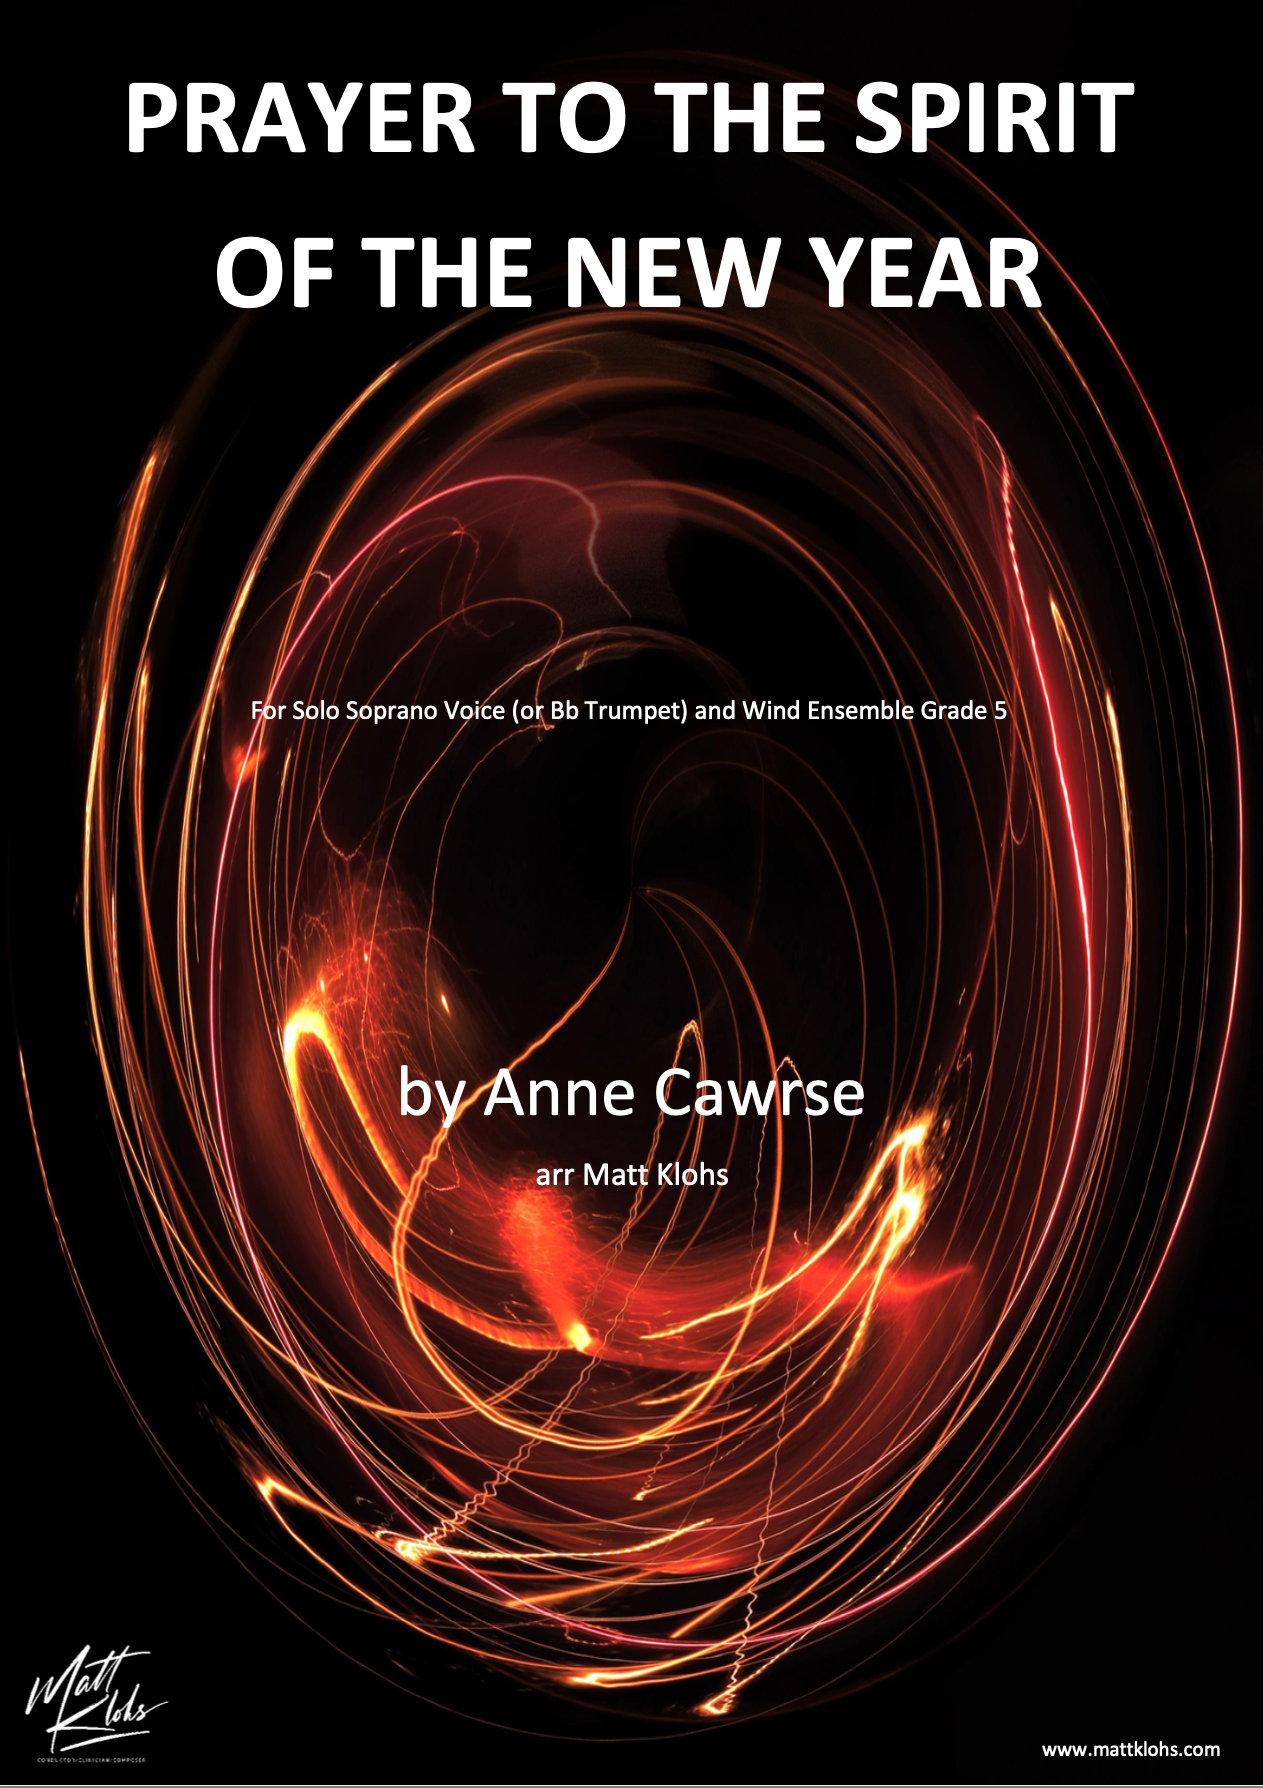 Prayer To The Spirit Of The New Year by Anne Cawrse